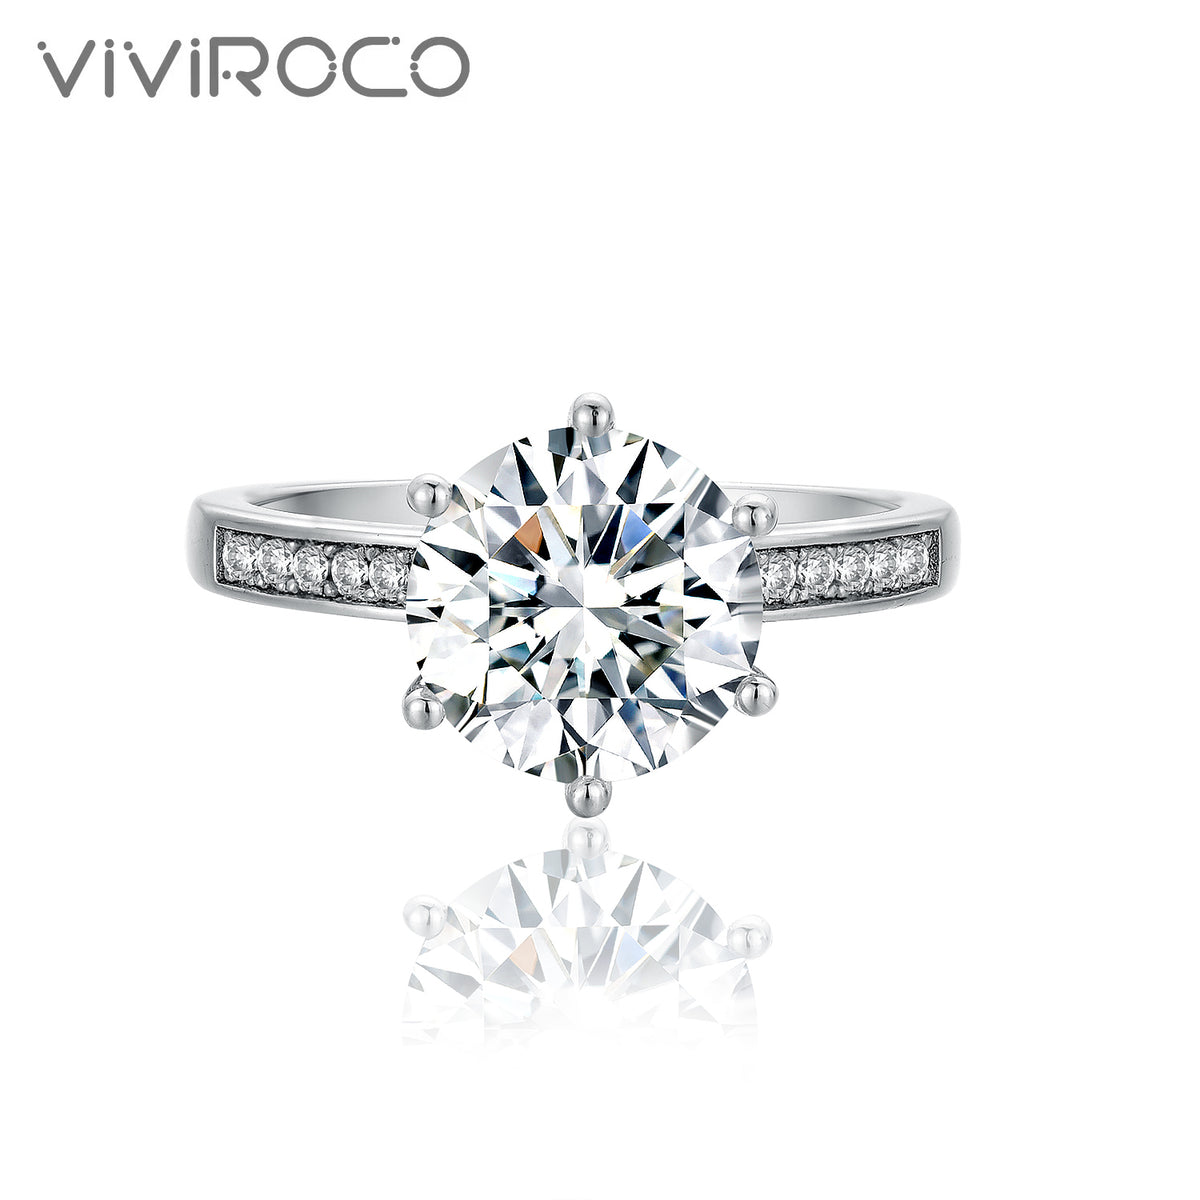 【02LIVE # link 36 - BUY 1 GET 1 free ring】S925 SilverLady Luck Silver Moissanite Ring 1/3 Carat RZHF001